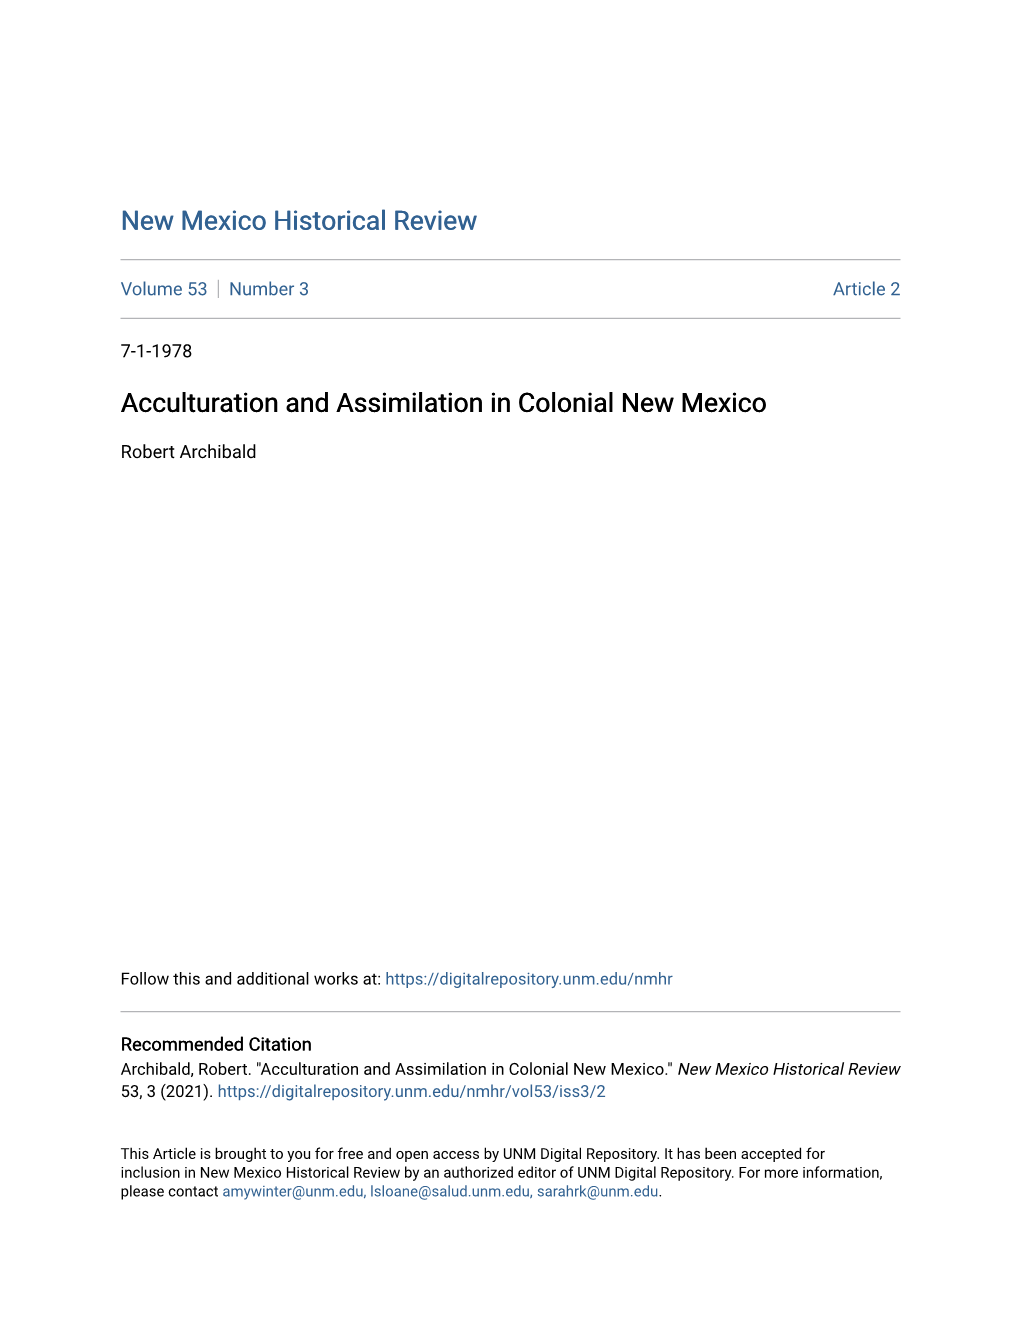 Acculturation and Assimilation in Colonial New Mexico